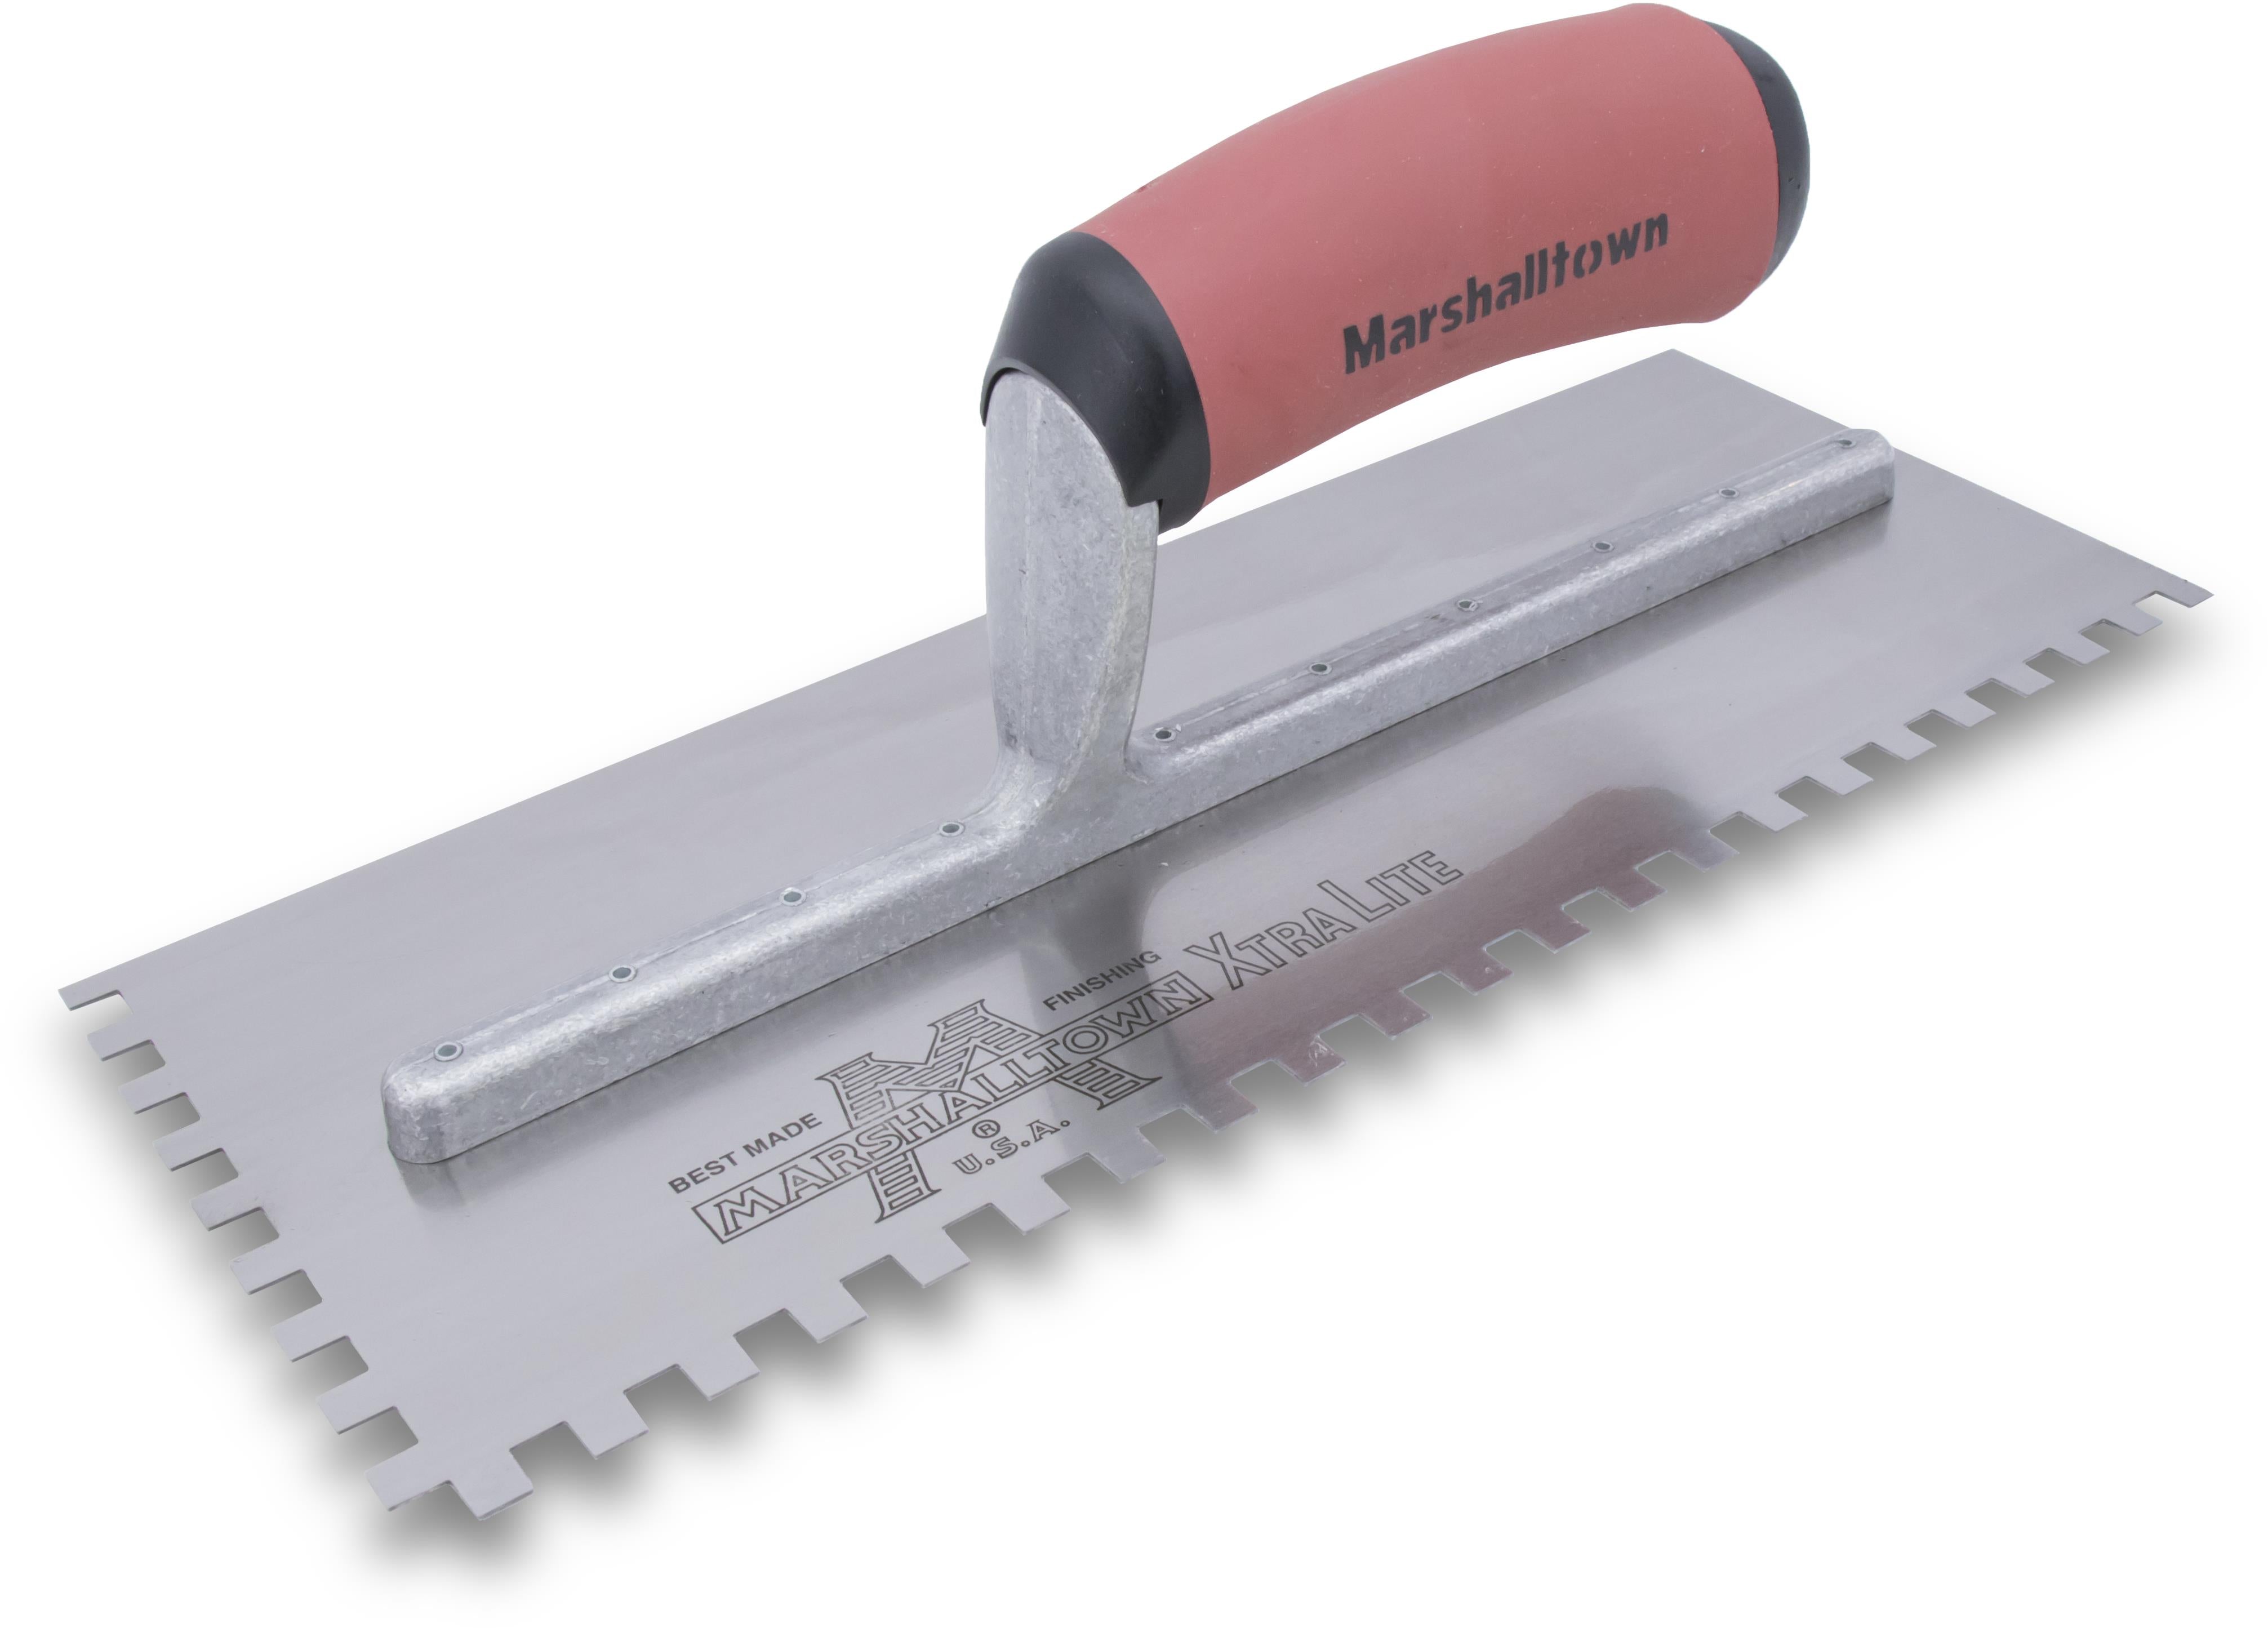 Marshalltown 15757 Tiling & Flooring Notched Trowel-1-2 X 1-2 X 1-2 Square-Dura-Soft Handle-Left Handed